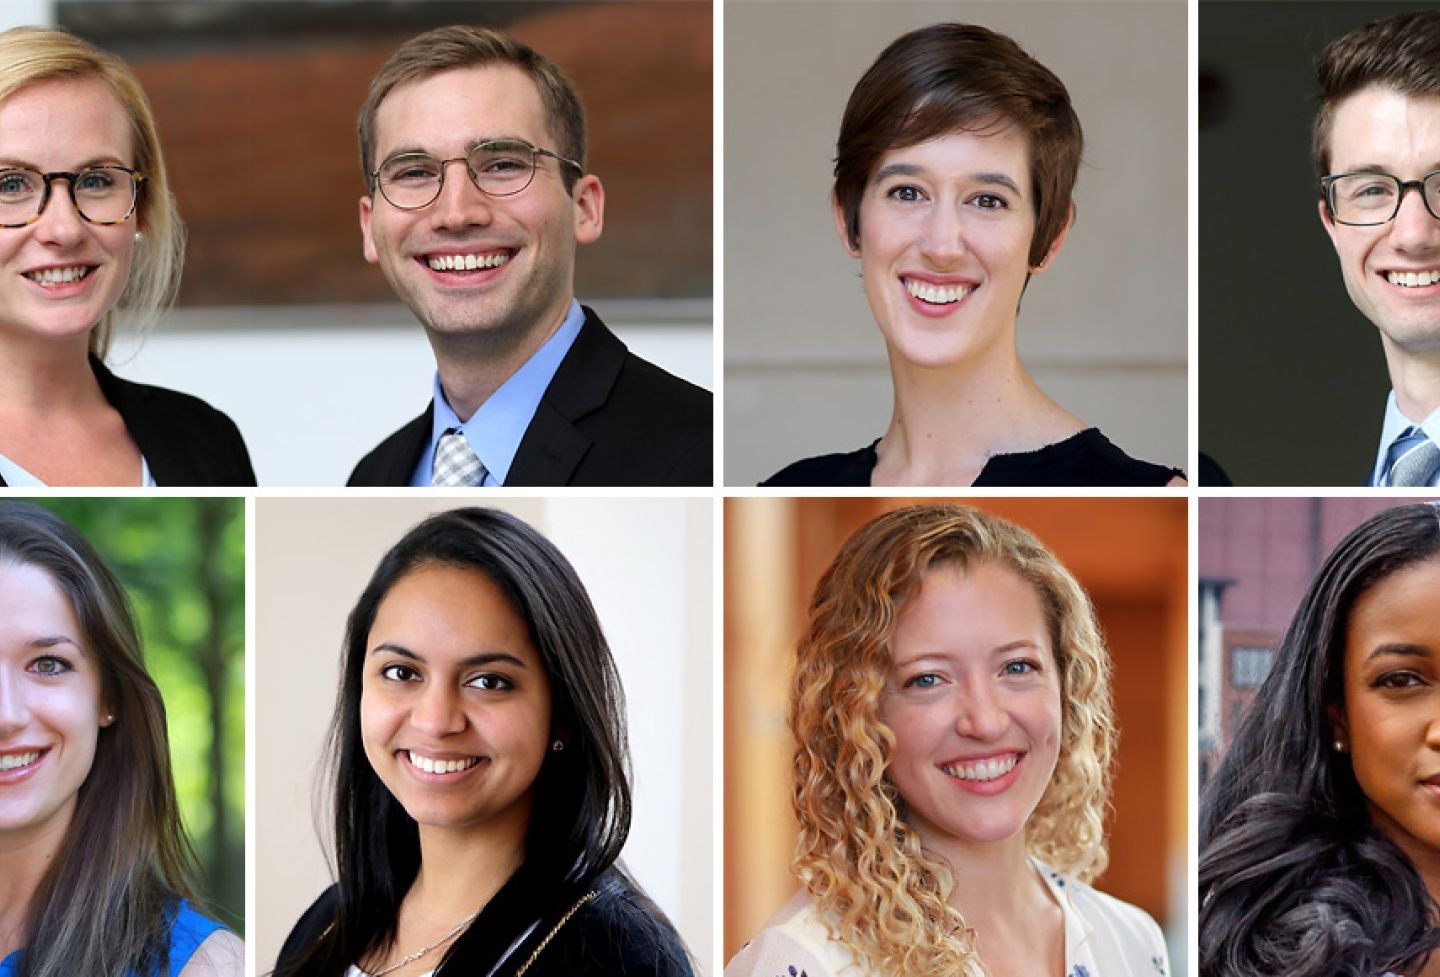 Members of the Class of 2019 notched notable achievements: Katharine Collins and Christopher Macomber won the 90th William Minor Lile Moot Court Competition; A. Cameron Duncan and David Goldman were named this year’s recipients of the Rosenbloom Award; and Kendall Burchard, Aparna Datta, Amanda Lineberry and Jianne McDonald were named this year’s Ritter Scholars.